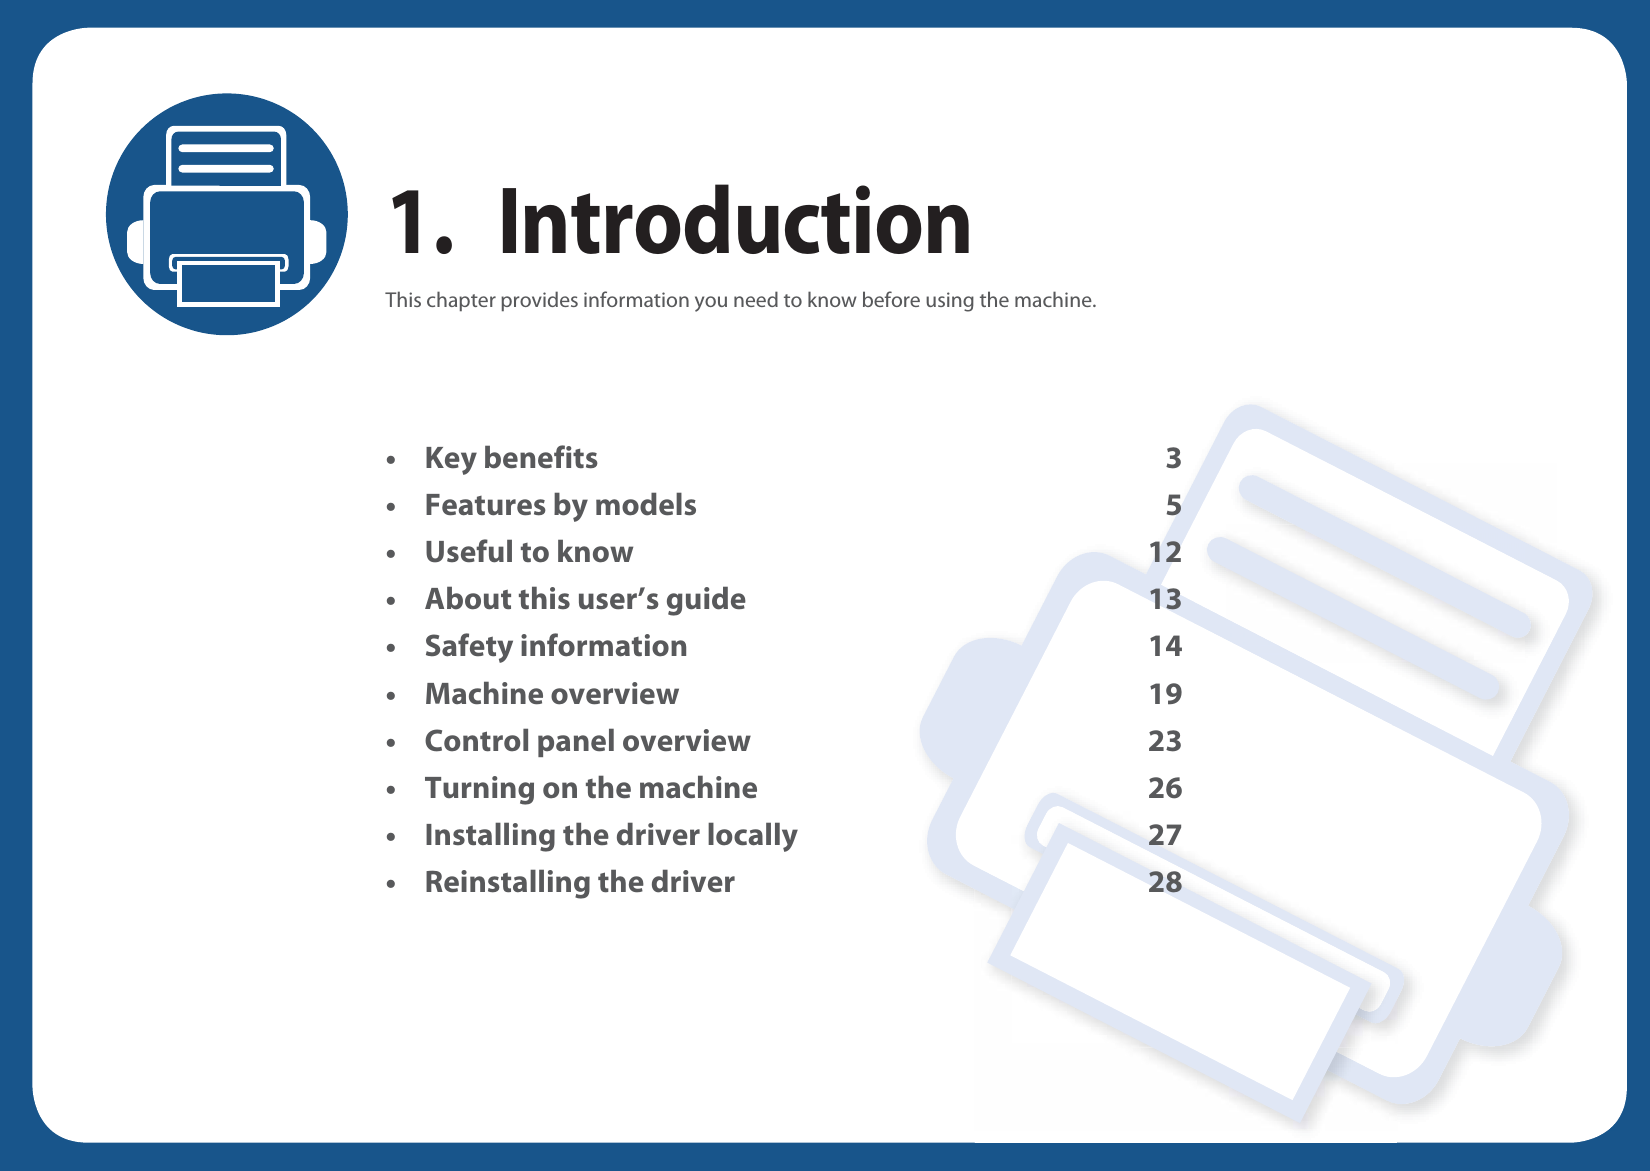 1. IntroductionThis chapter provides information you need to know before using the machine.•Key benefits 3• Features by models 5• Useful to know 12• About this user’s guide 13• Safety information 14• Machine overview 19• Control panel overview 23• Turning on the machine 26• Installing the driver locally 27• Reinstalling the driver 28